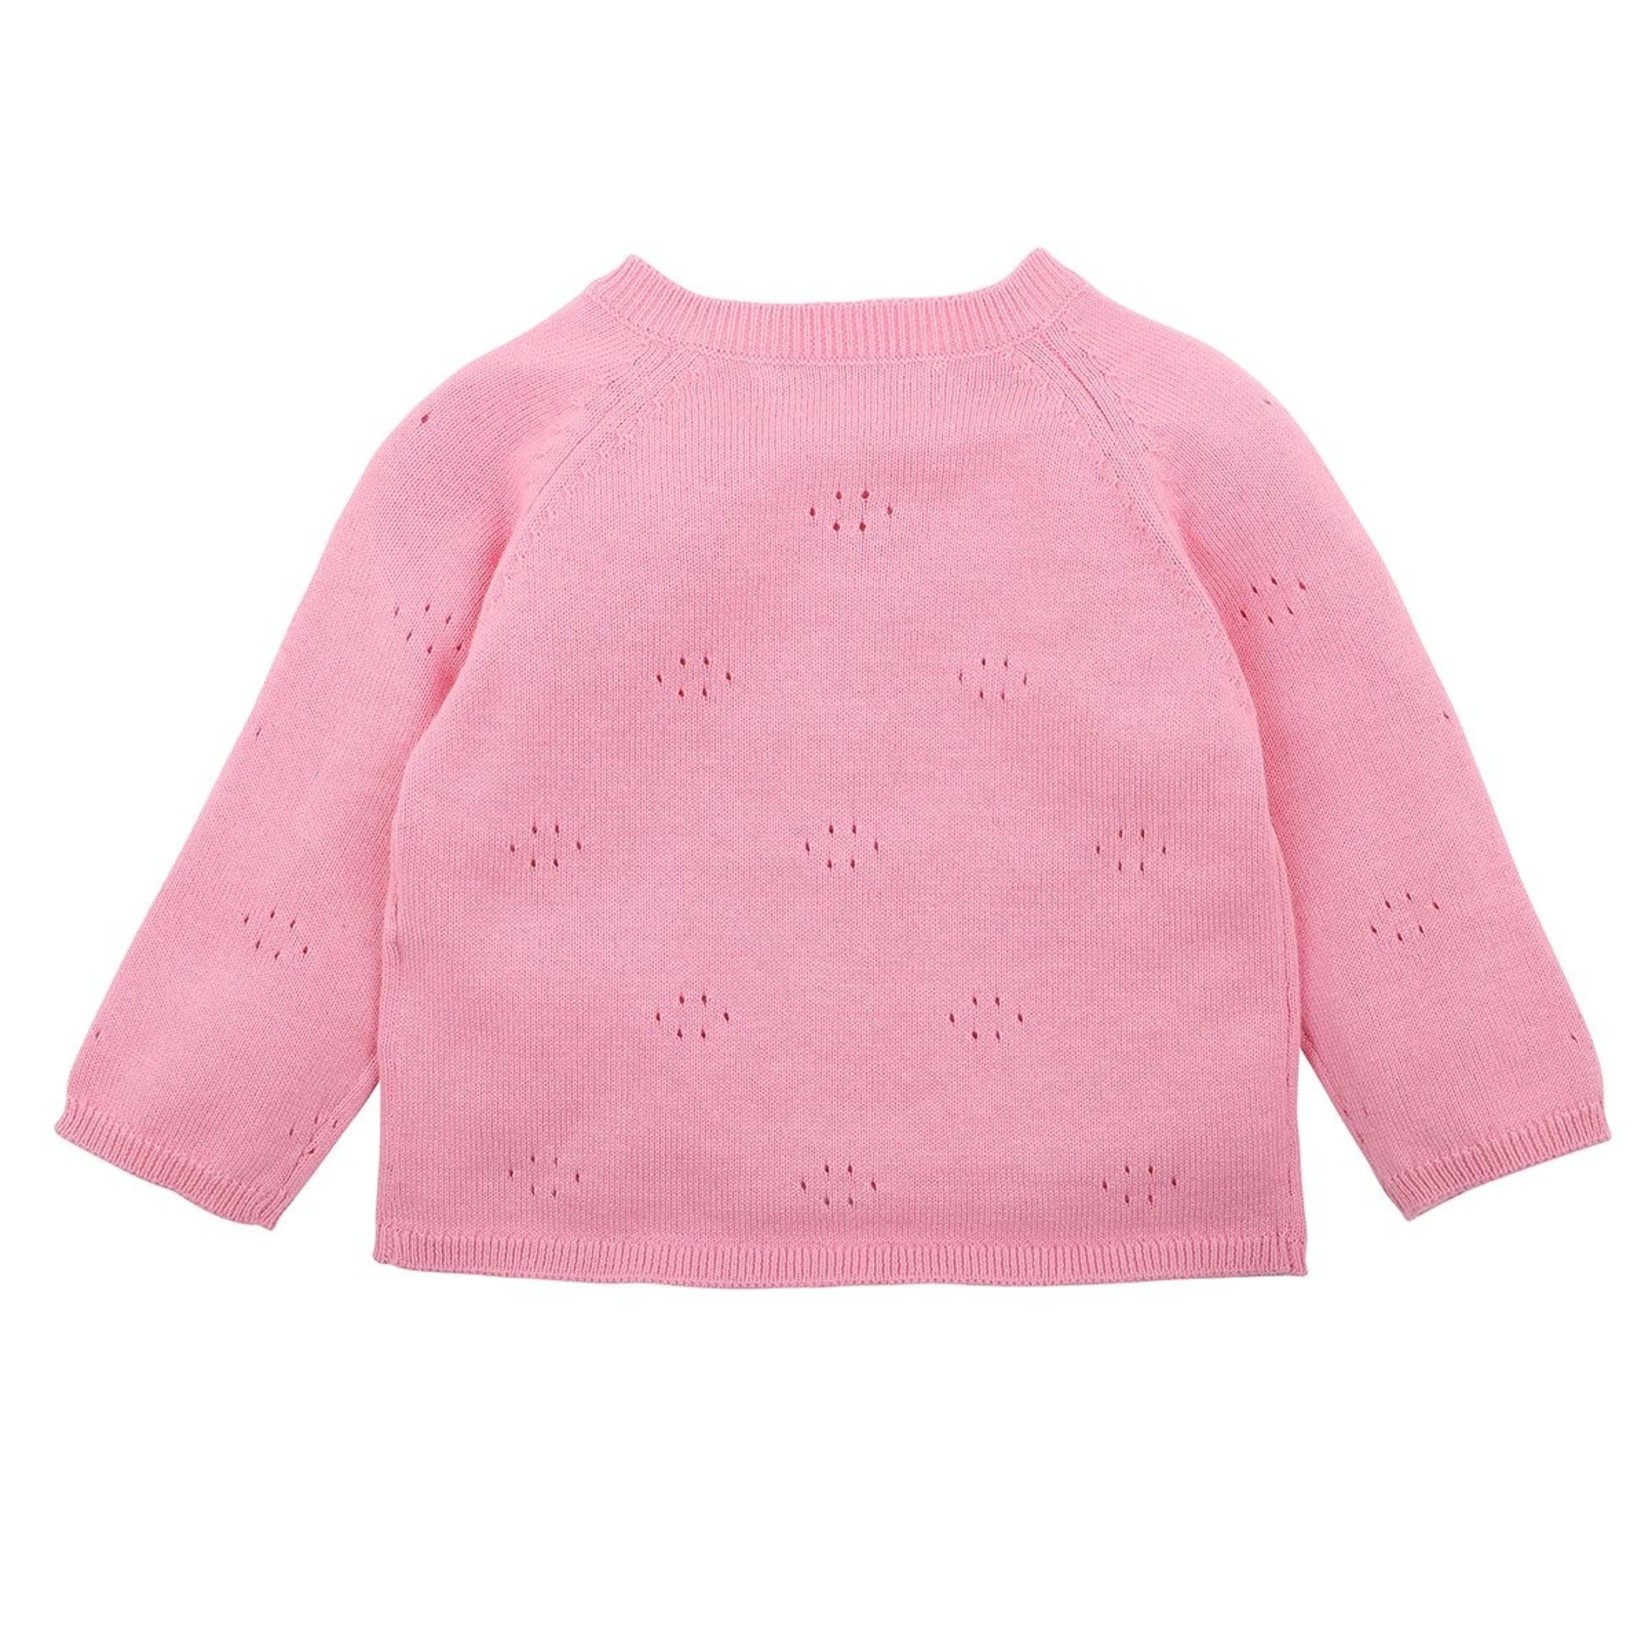 Bebe Orchid Pointelle Cardigan